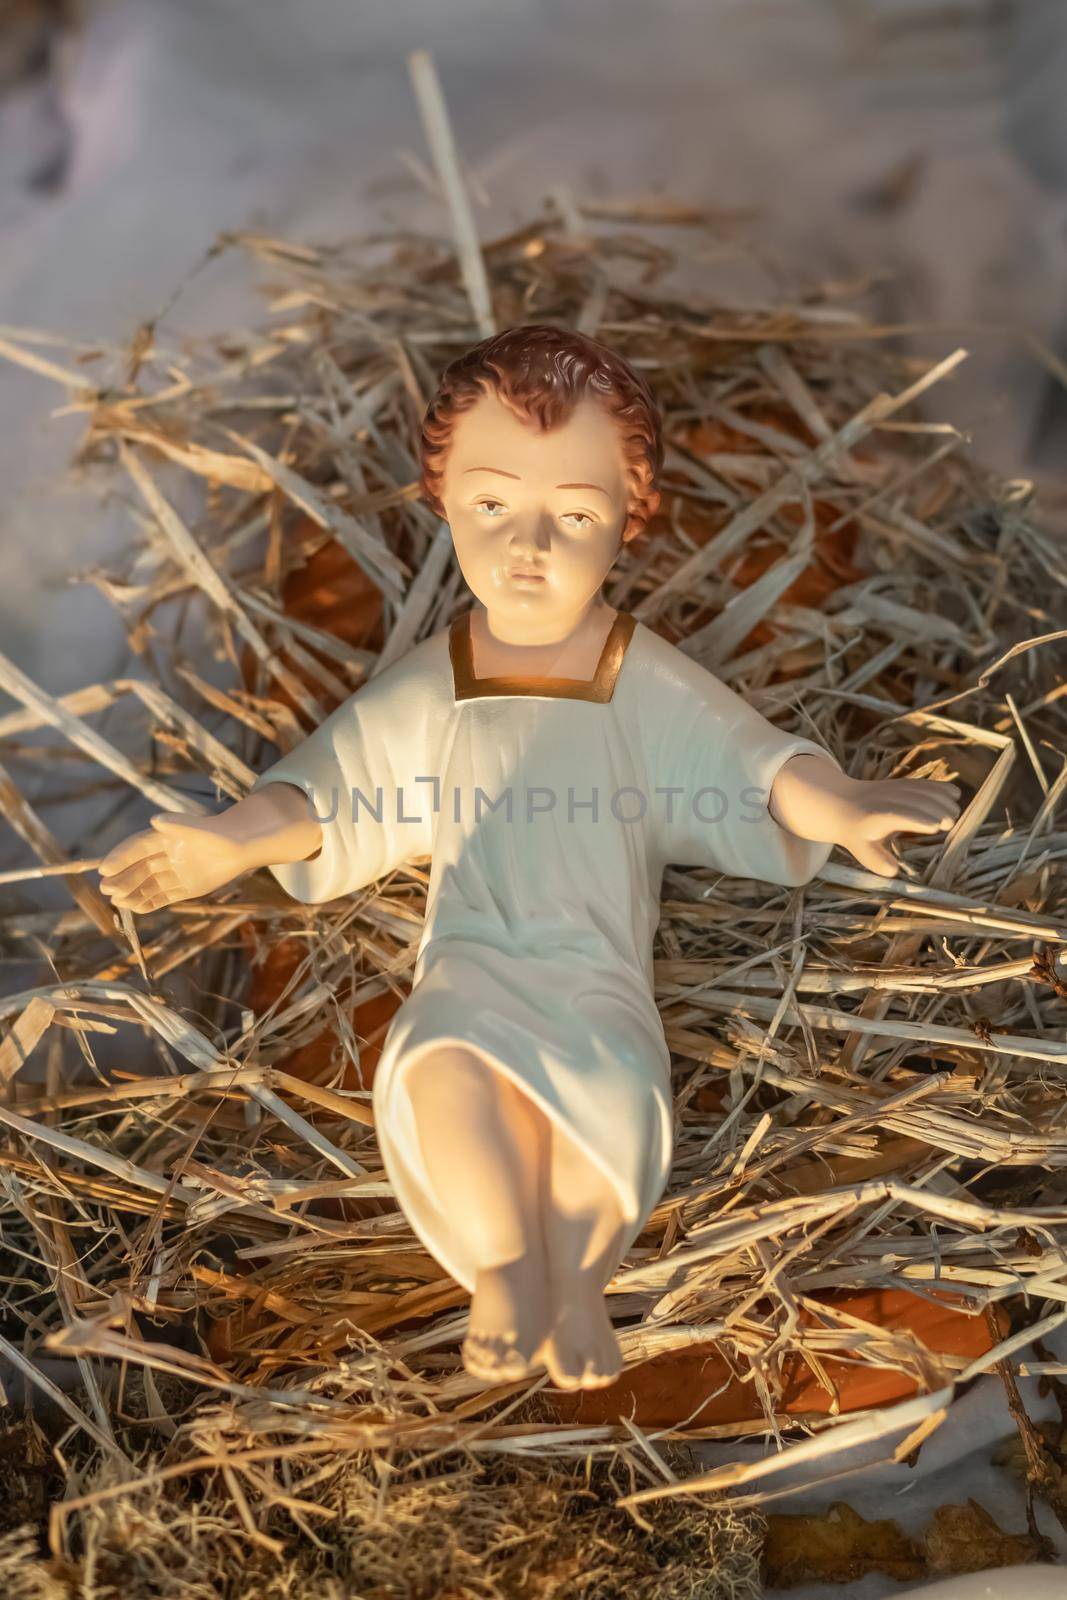 Baby Jesus laying in a cradle